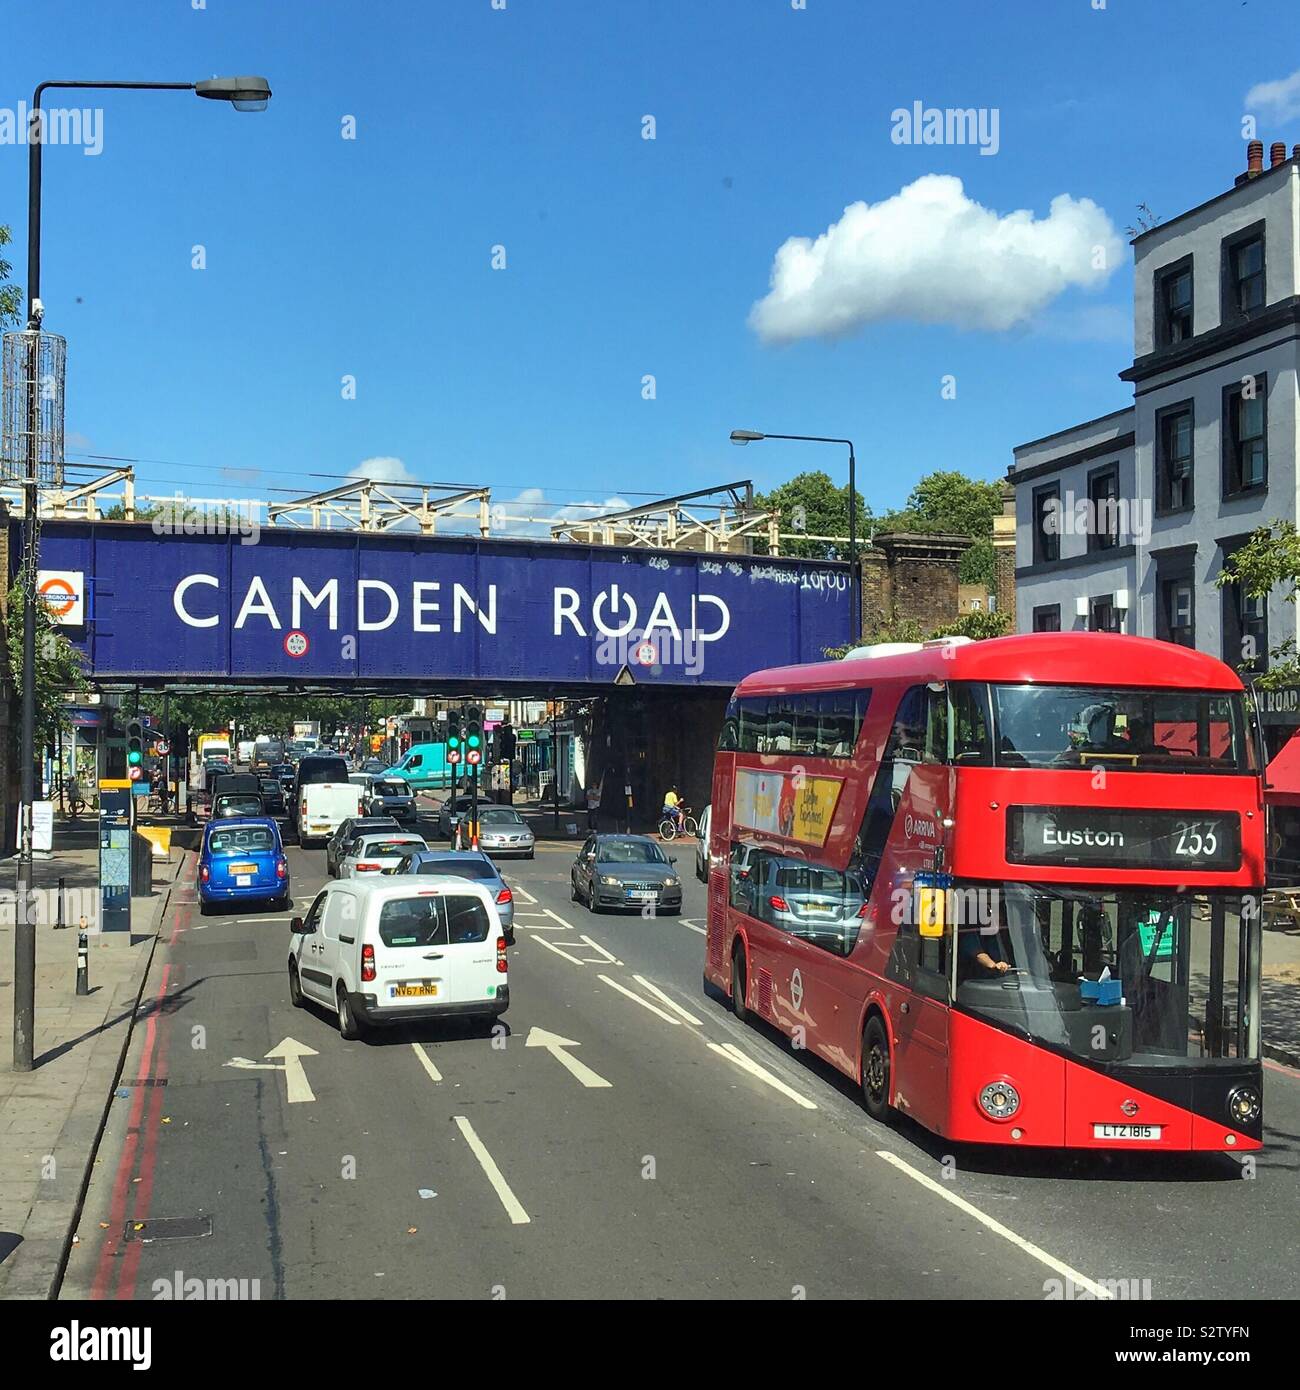 A double decker red bus at Camden Road, London, England UK Stock Photo